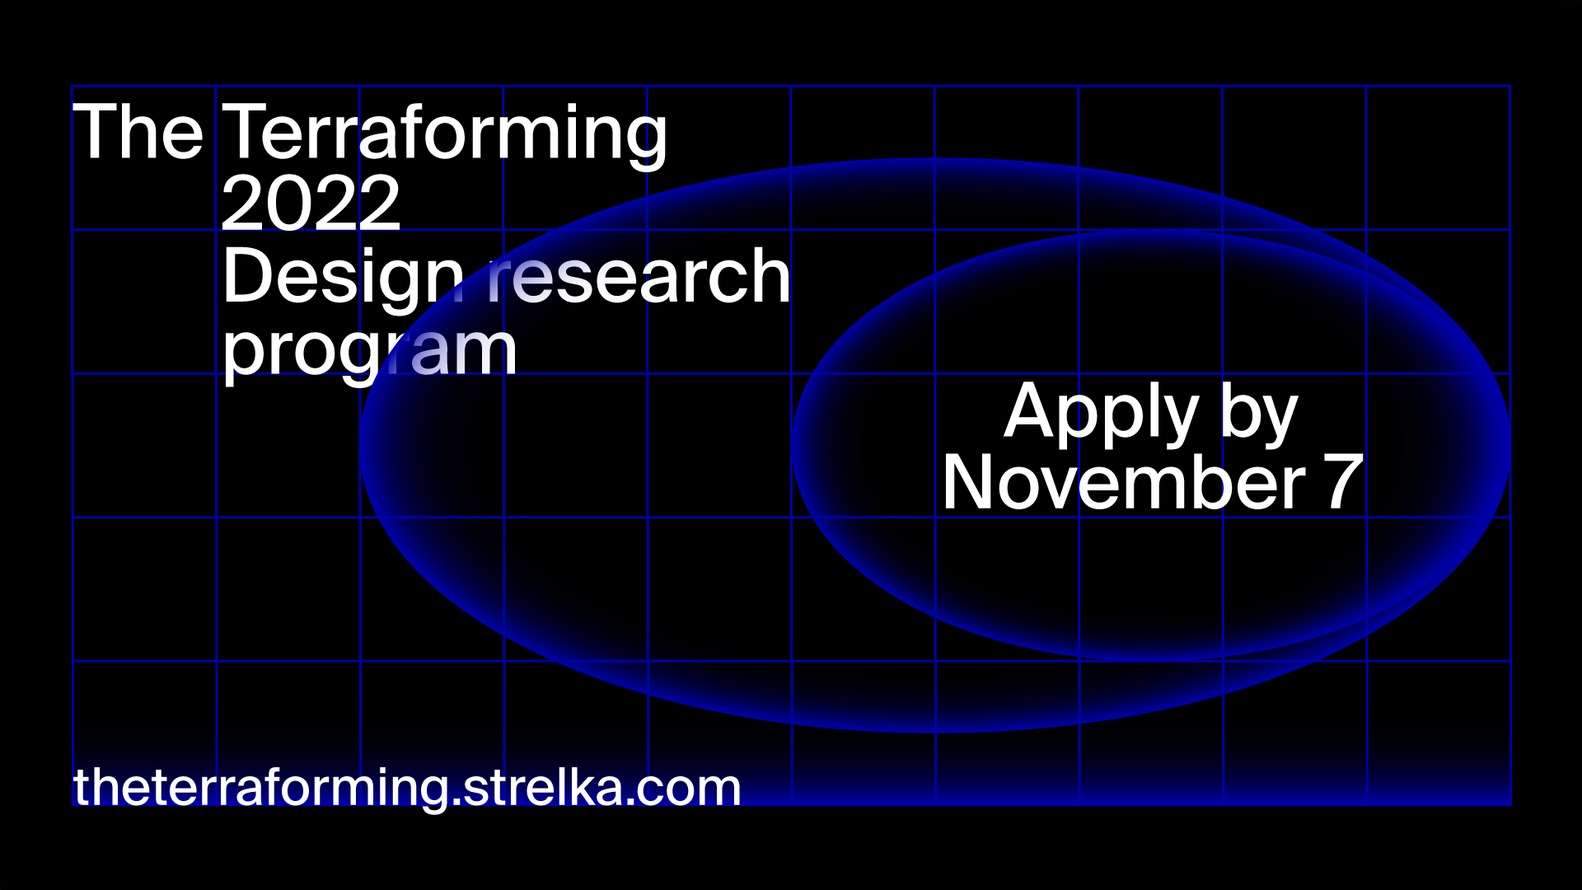 Call for Submissions: The Terraforming 2022